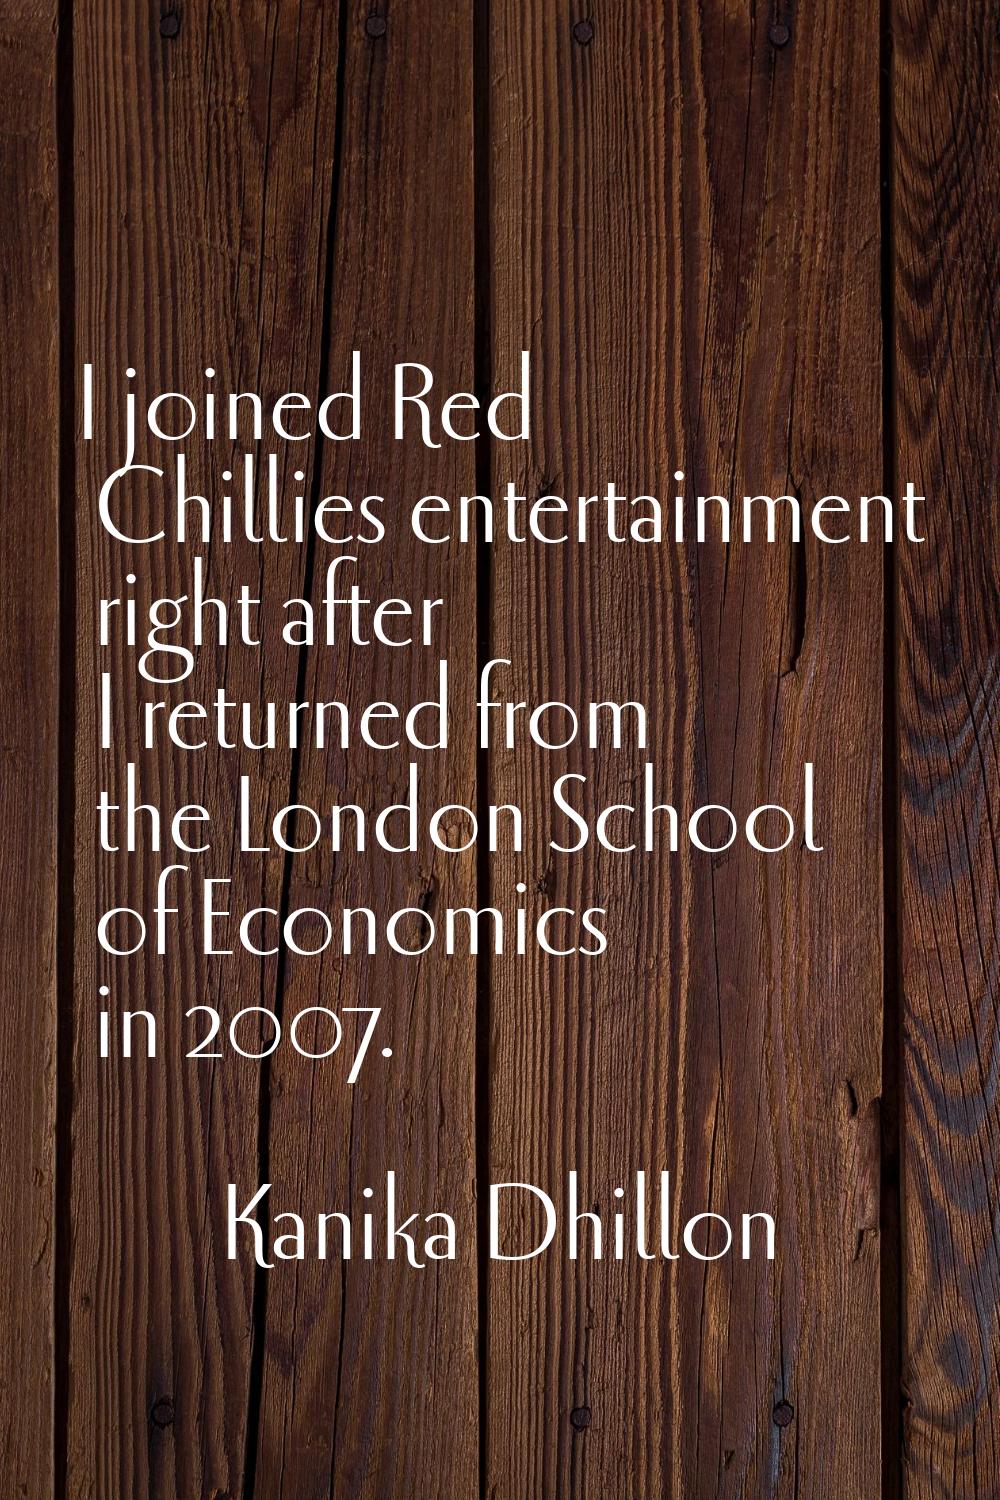 I joined Red Chillies entertainment right after I returned from the London School of Economics in 2